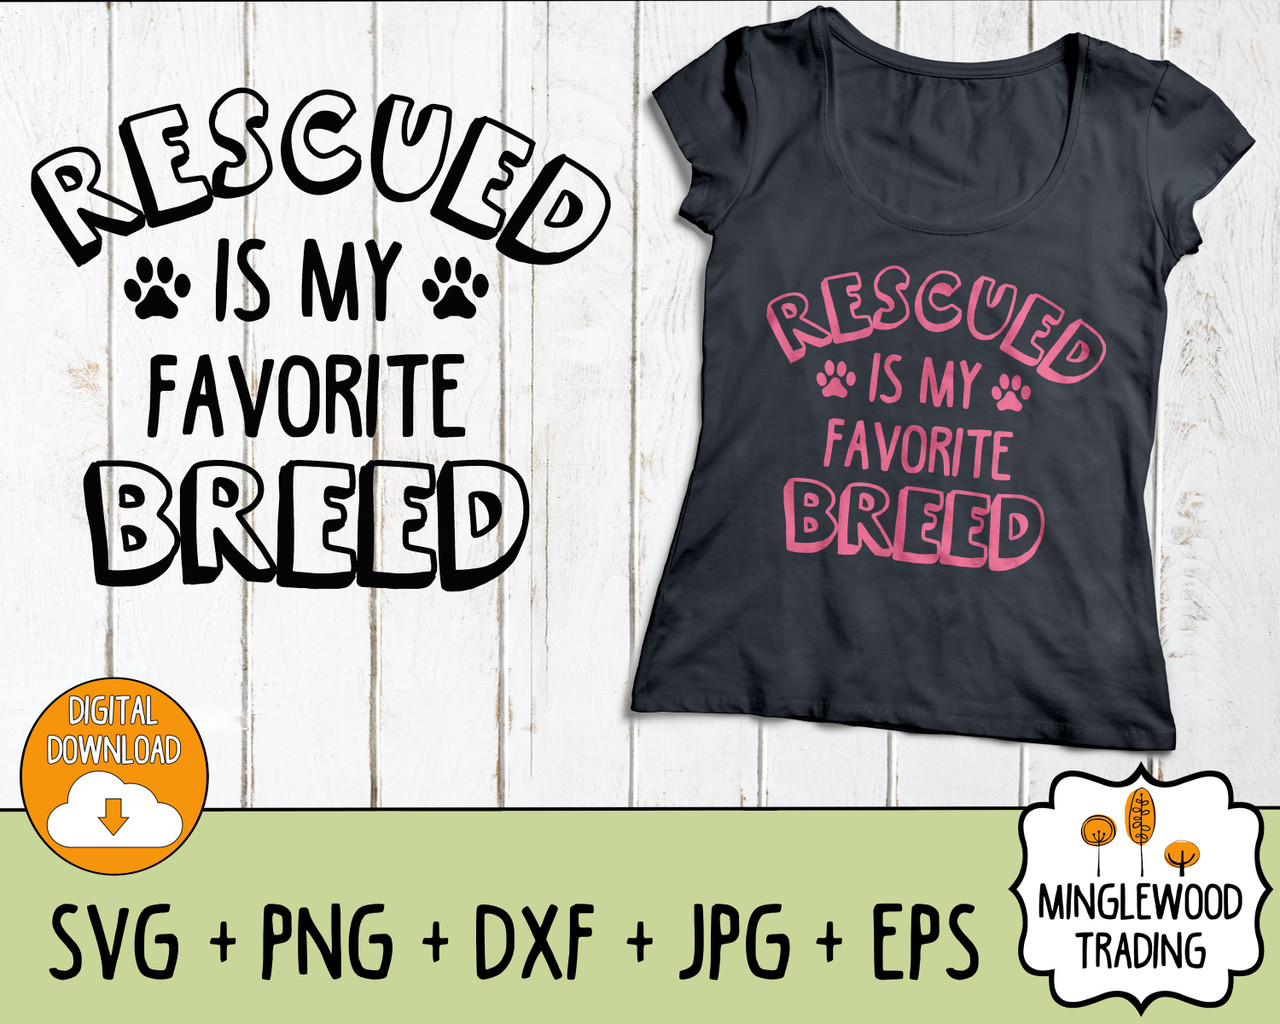 Rescued is my Favorite Breed SVG Cut File - Instant Download PNG JPG DXF EPS Silhouette, Cricut cut file, digital file